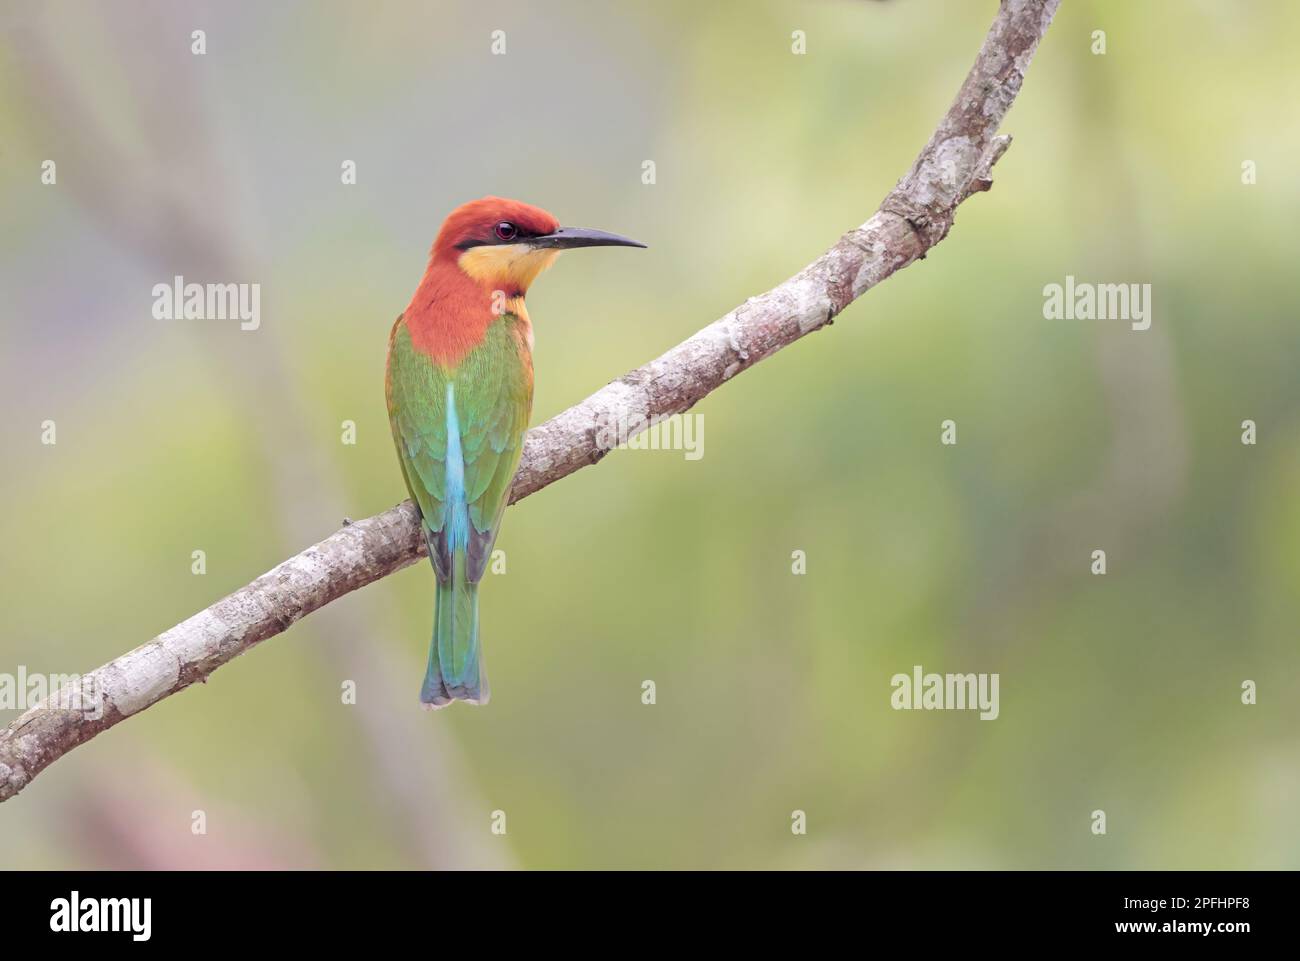 chestnut-headed bee-eater, or bay-headed bee-eater, is a near passerine bird in the bee-eater family Meropidae. this photo was taken from Bangladesh. Stock Photo